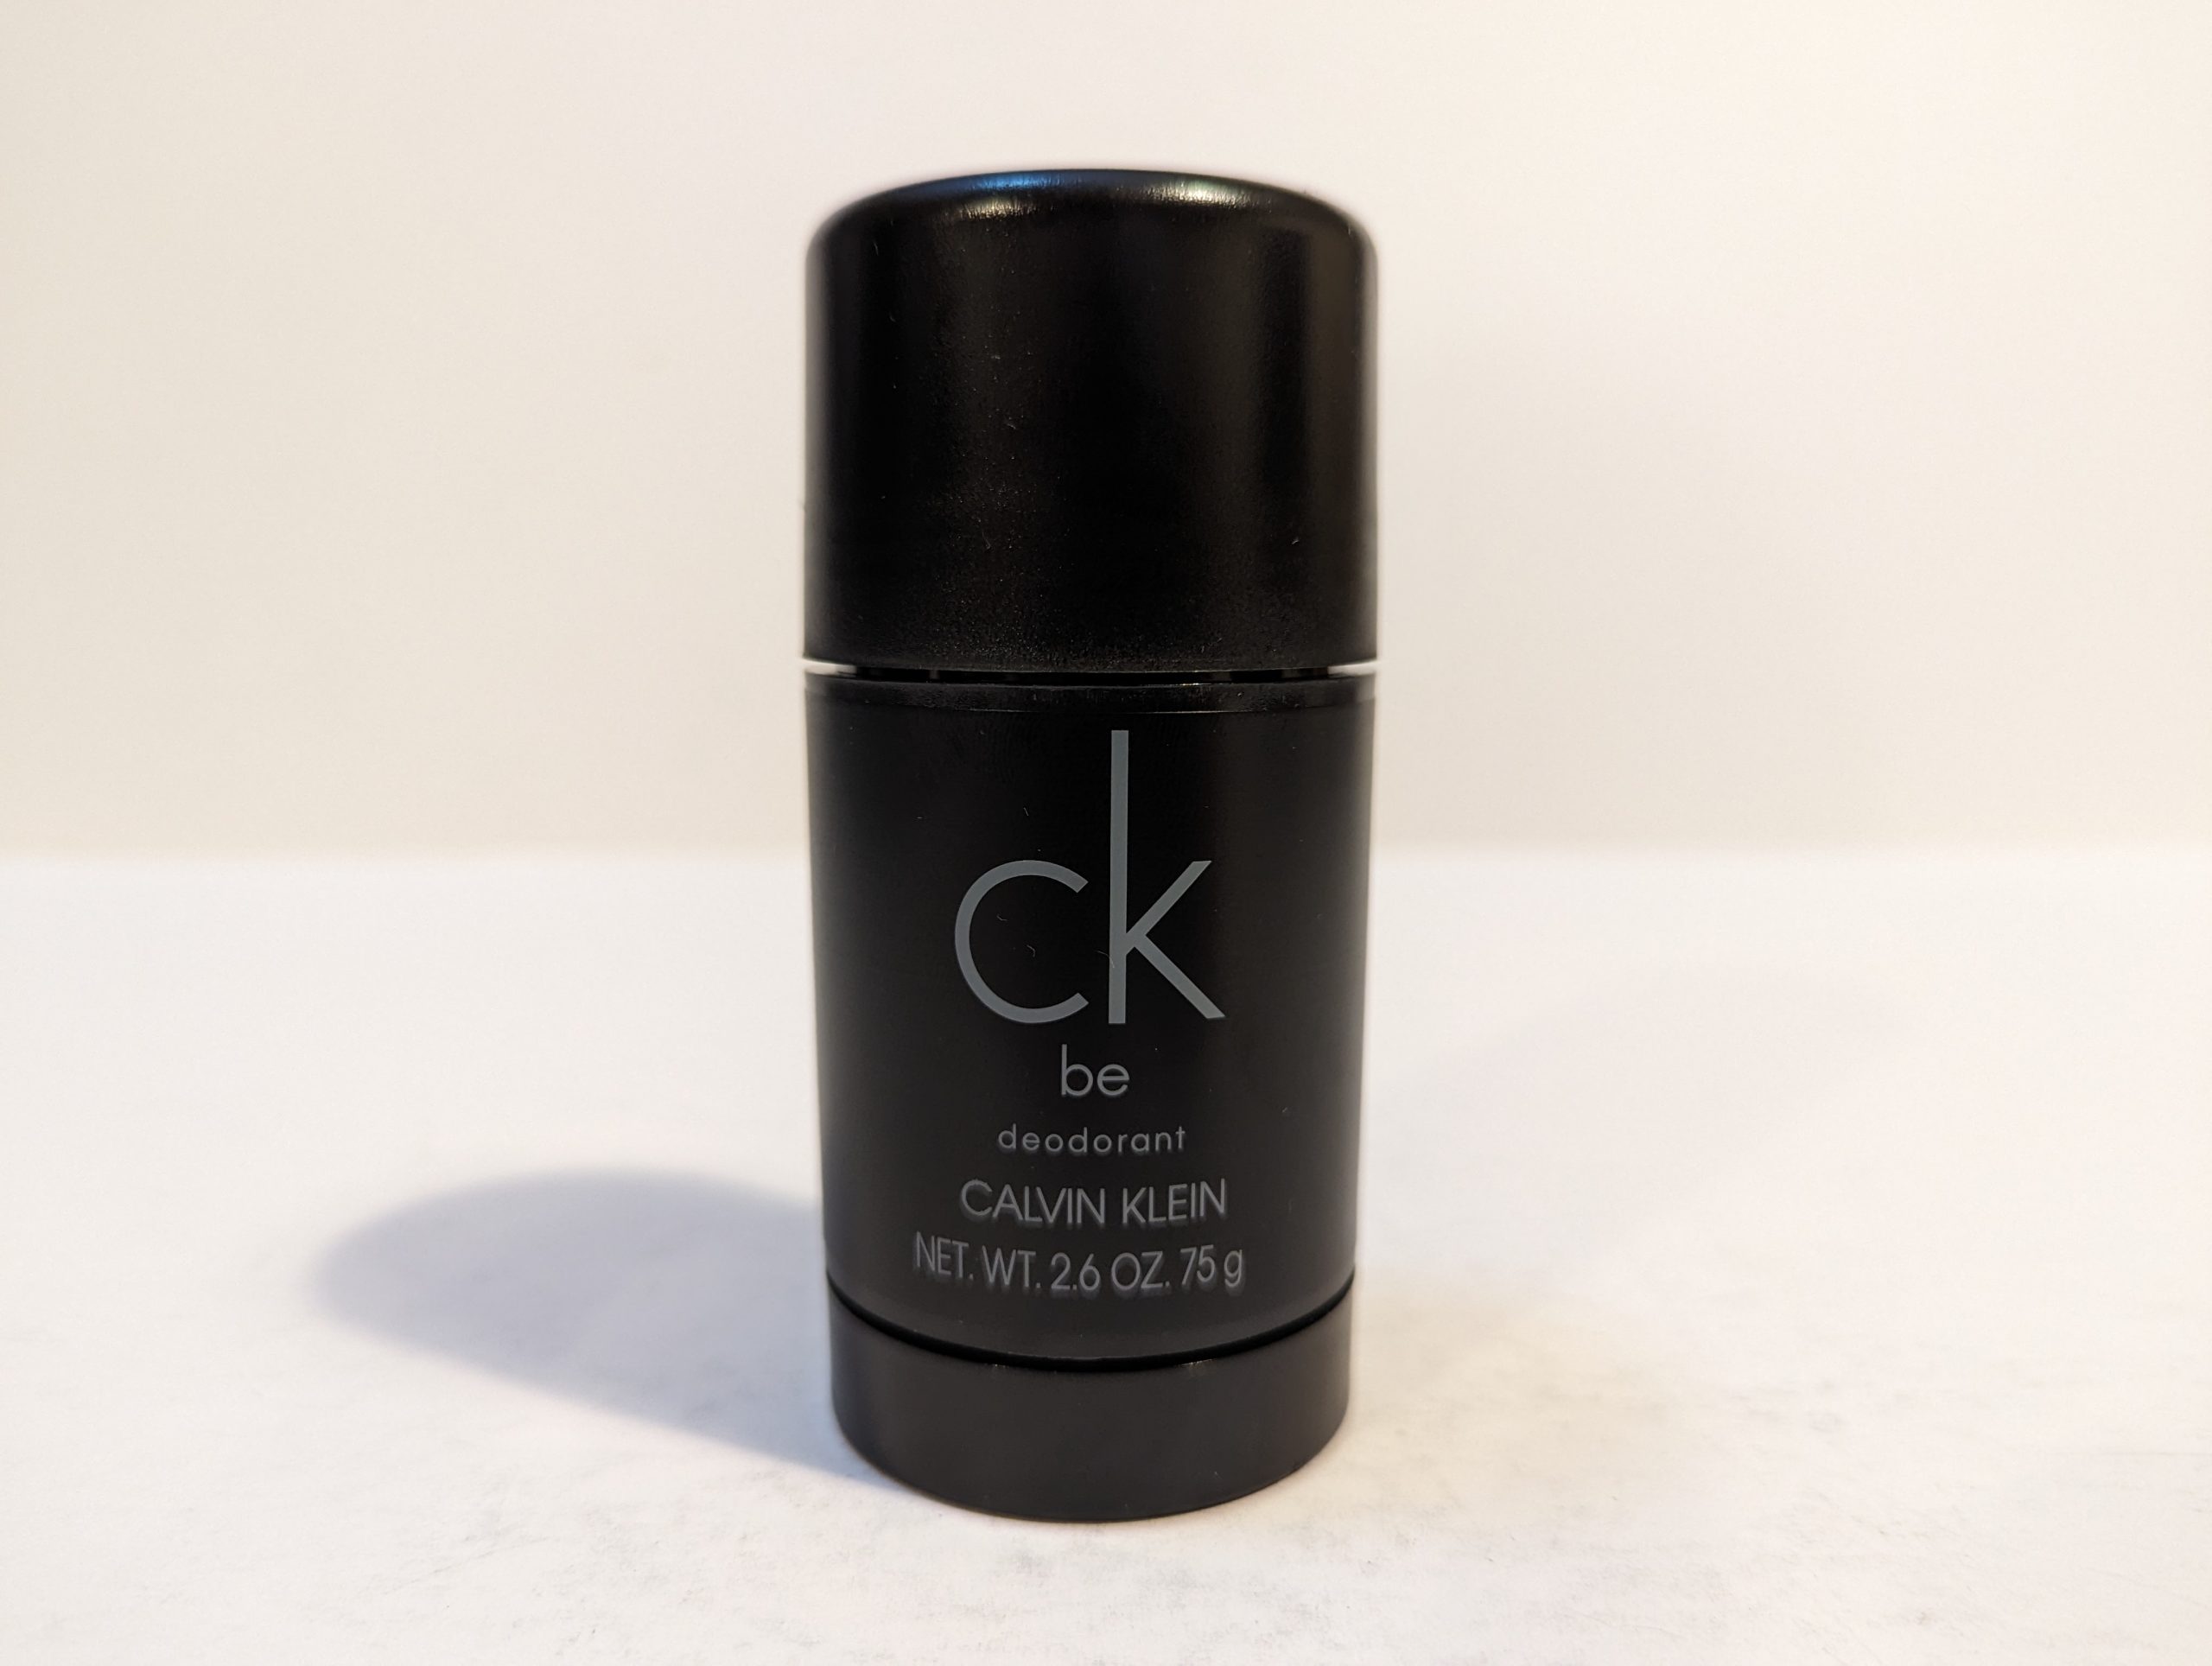 A black, cylindrical deodorant stick with “ck be” written on it in light gray text. The label indicates it is a Calvin Klein product with a net weight of 2.6 ounces (75 grams).